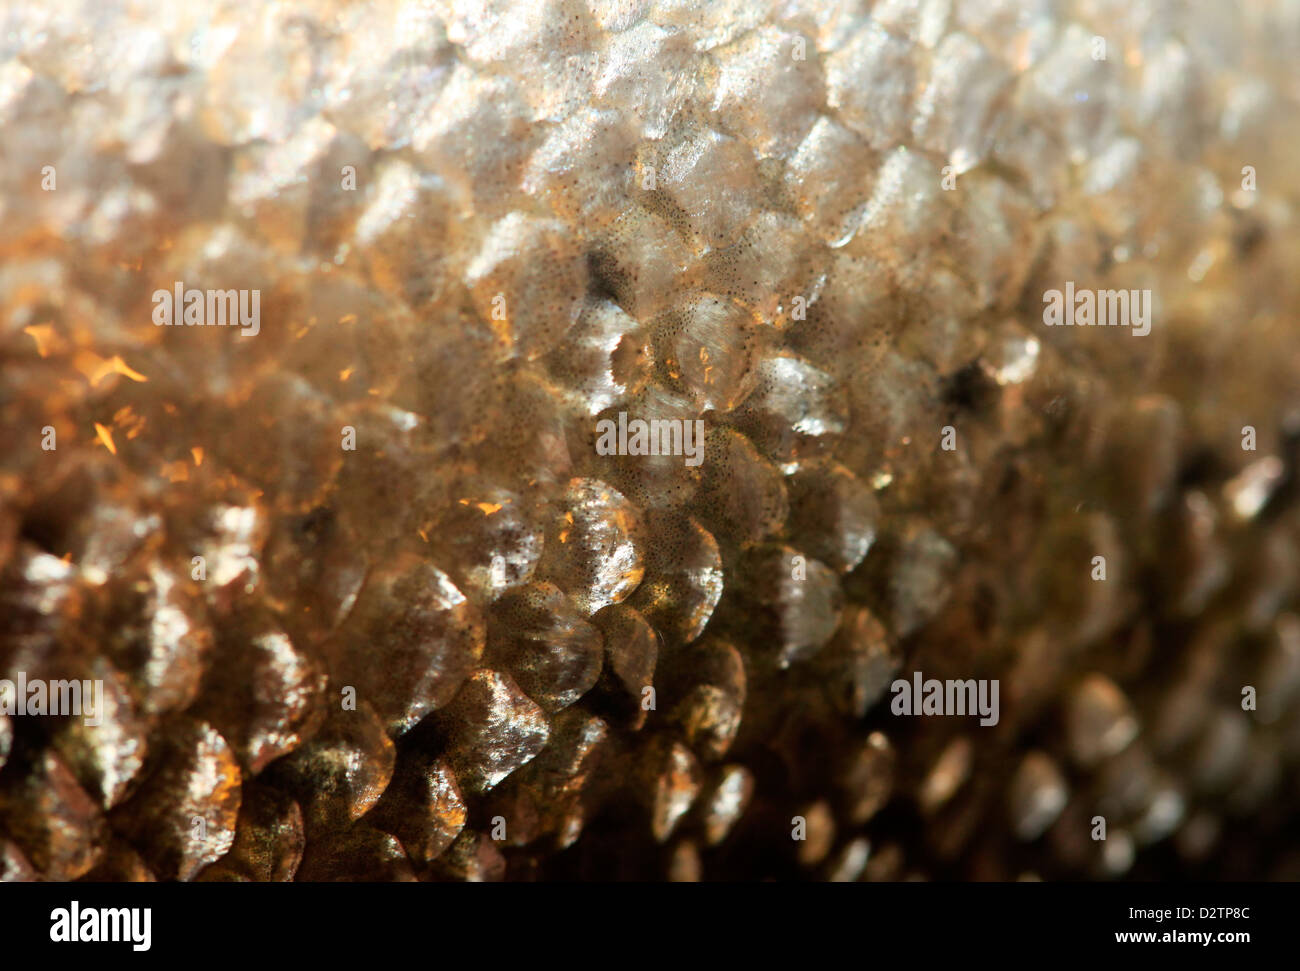 Extreme close up of fish scales stock photo